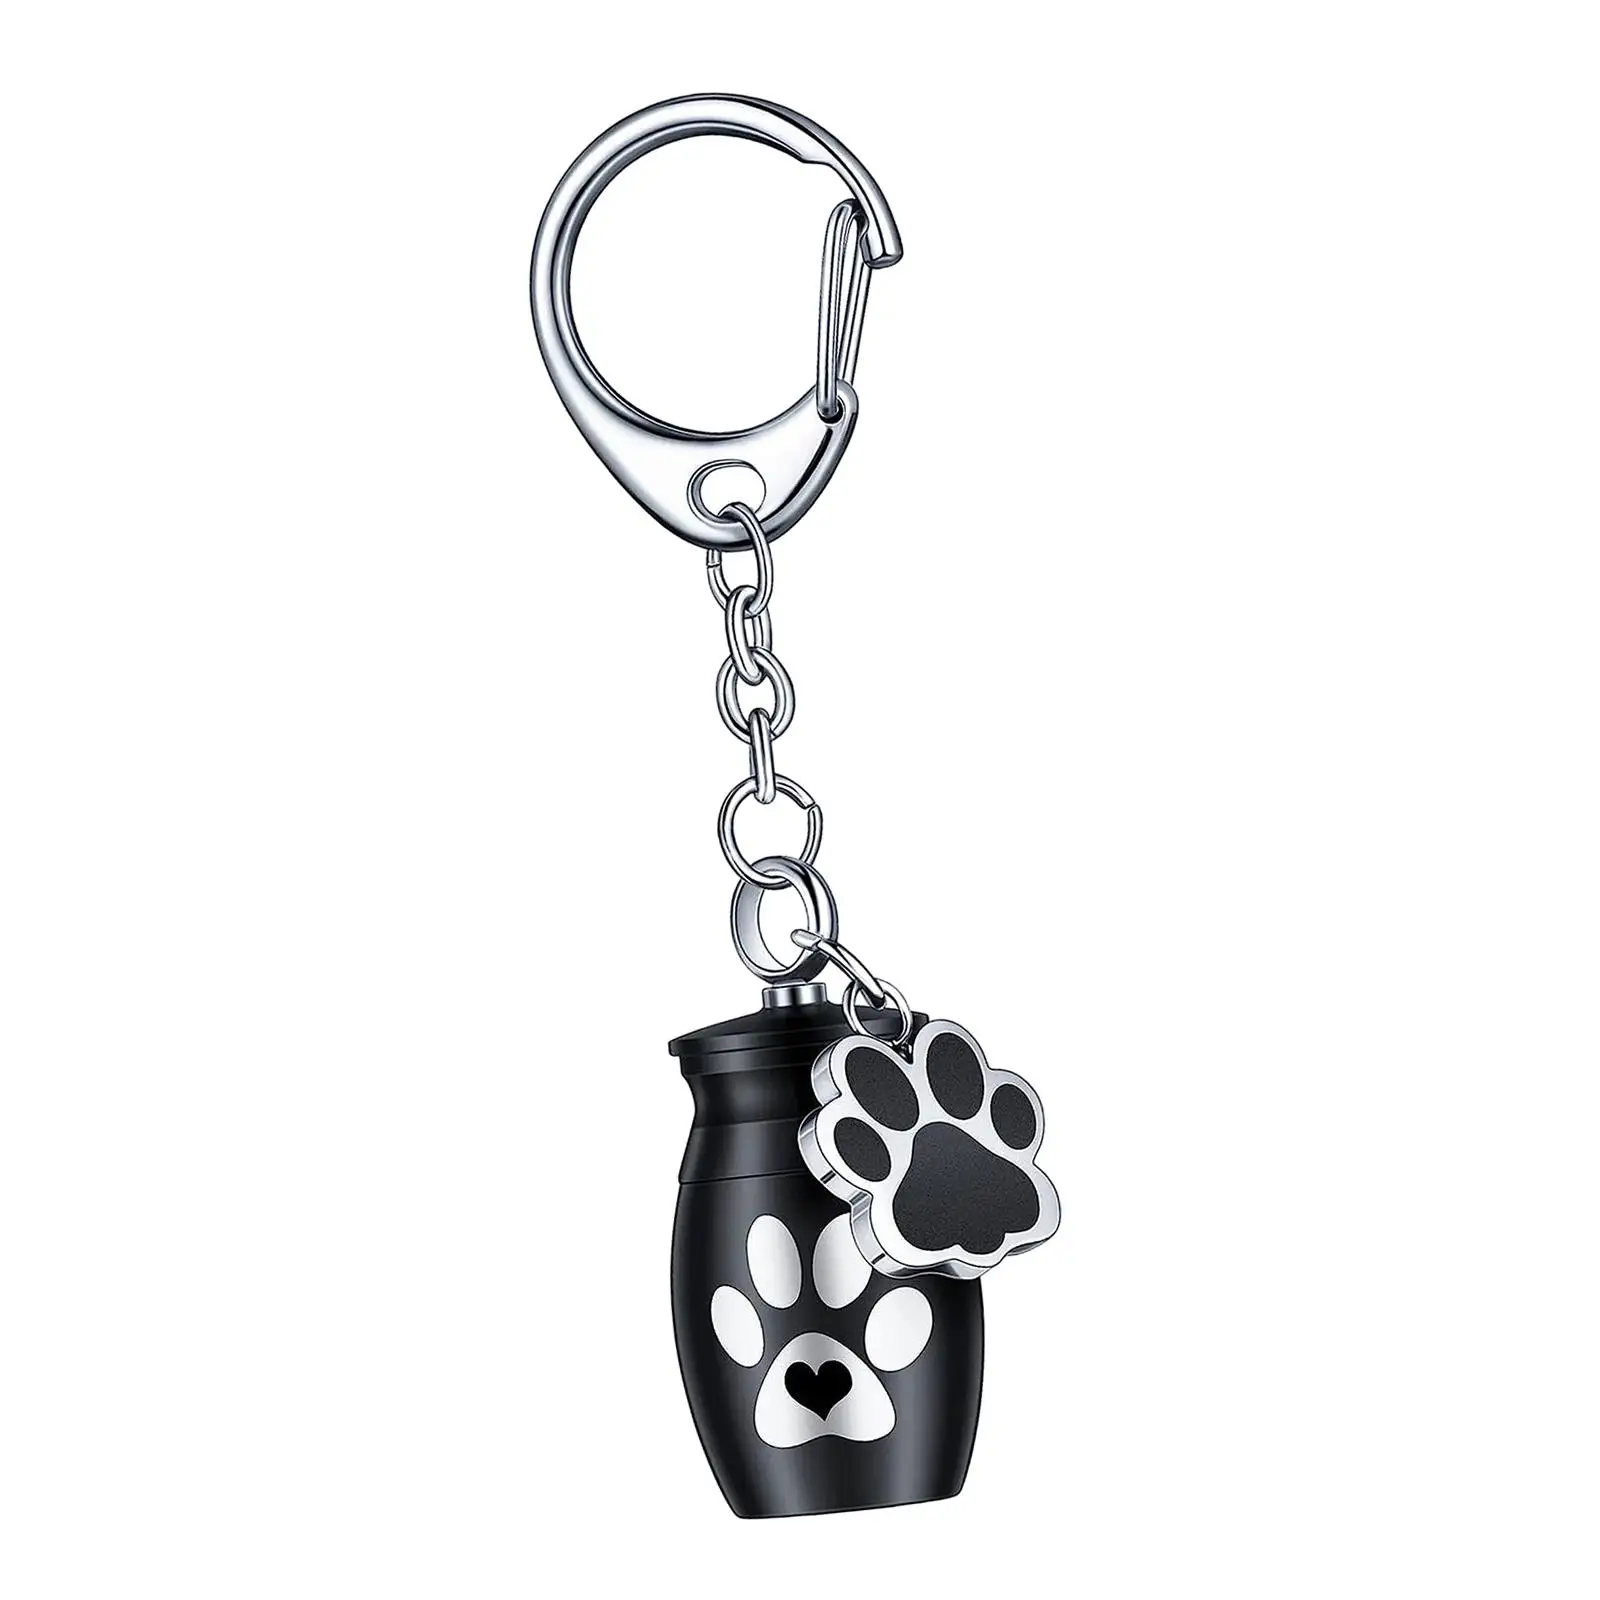 Small Keychain Pet Urn Keep Precious Memories Dog Cat Ash Container Souvenir Cremation Jewelry Pendant for Puppy Kitten Bunny